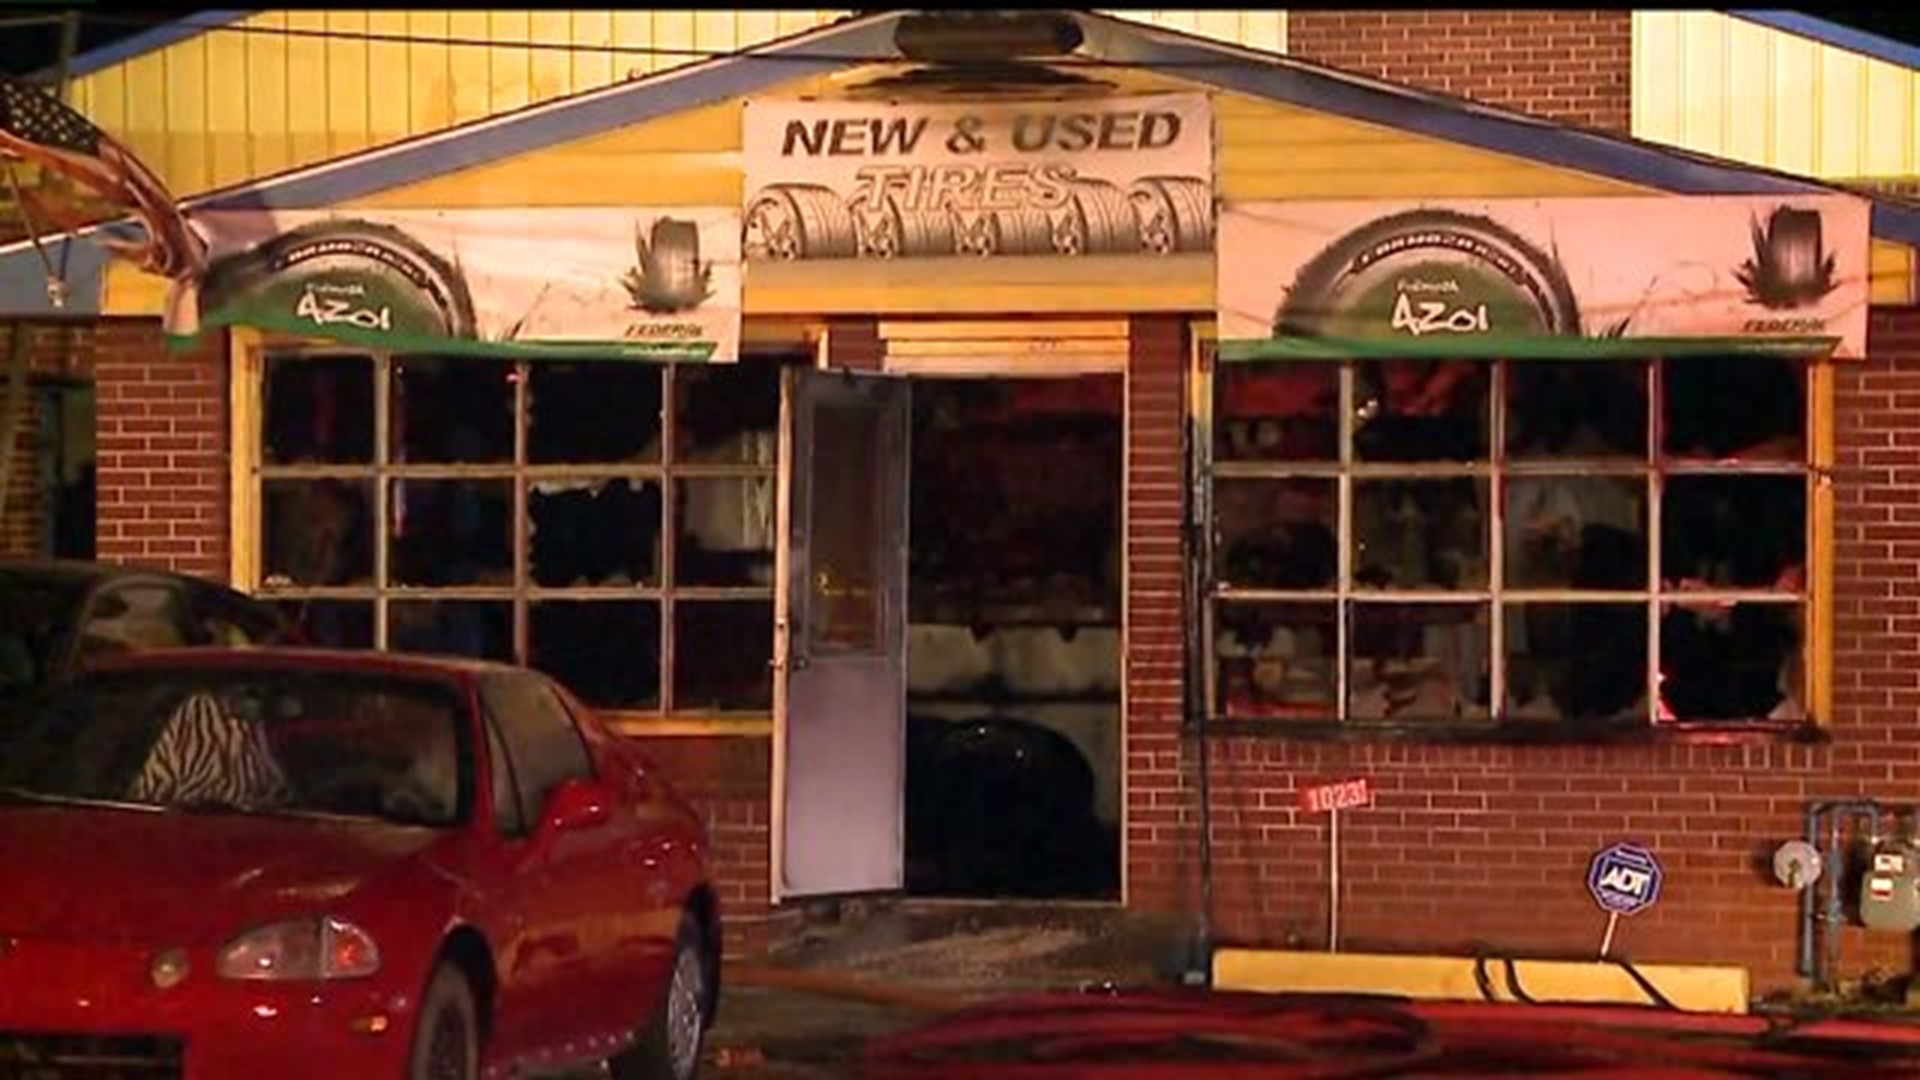 None injured after fire rips through auto shop in Lancaster City